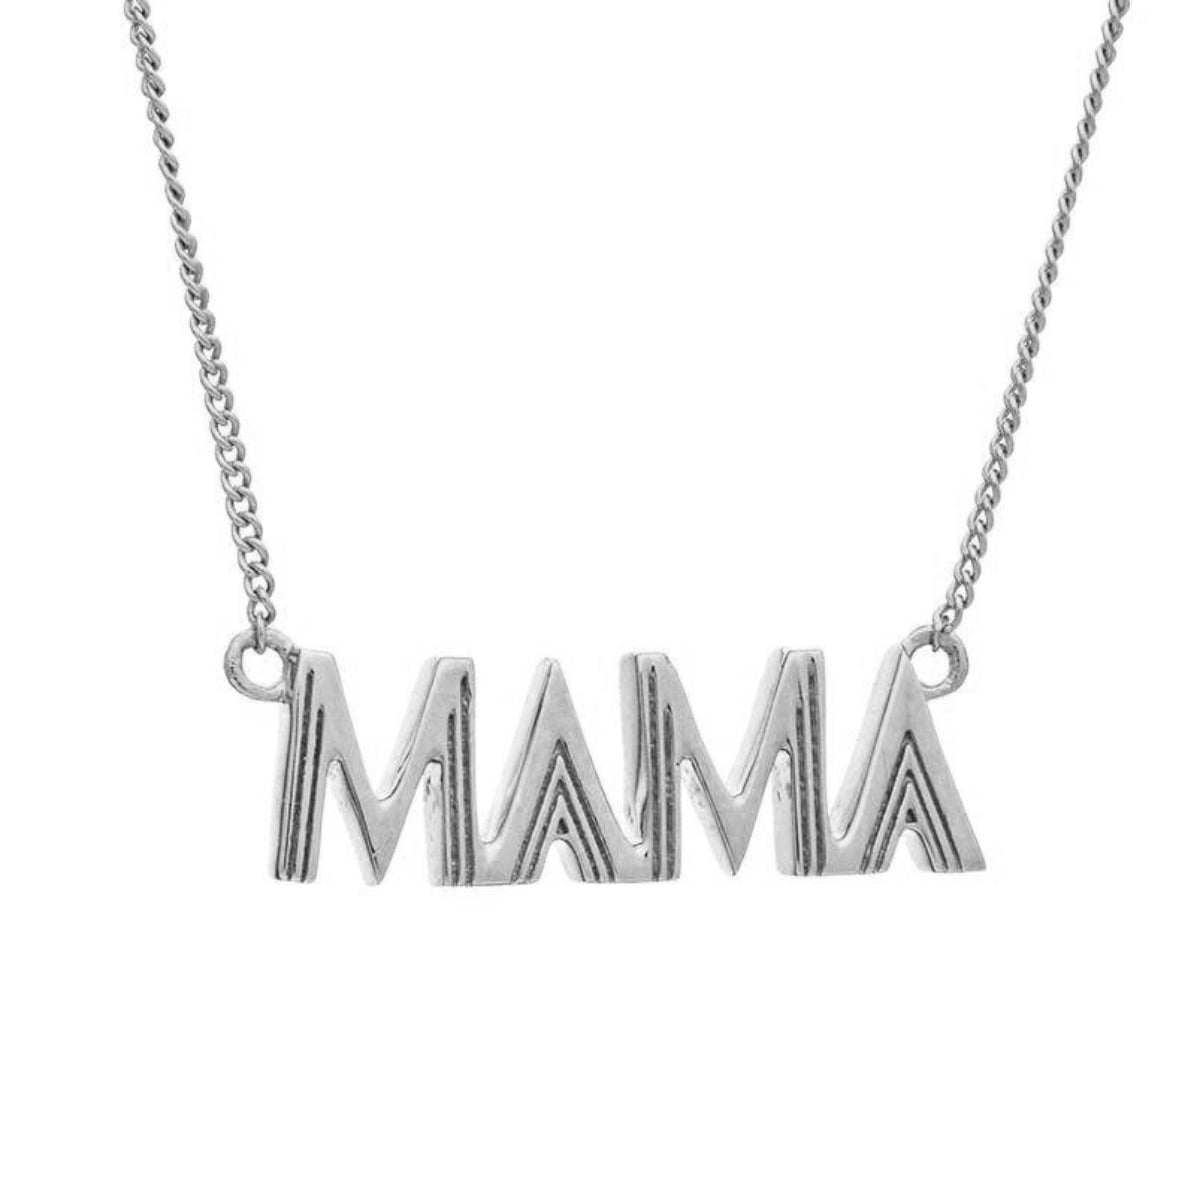 Featherly mama necklace in 925 sterling silver